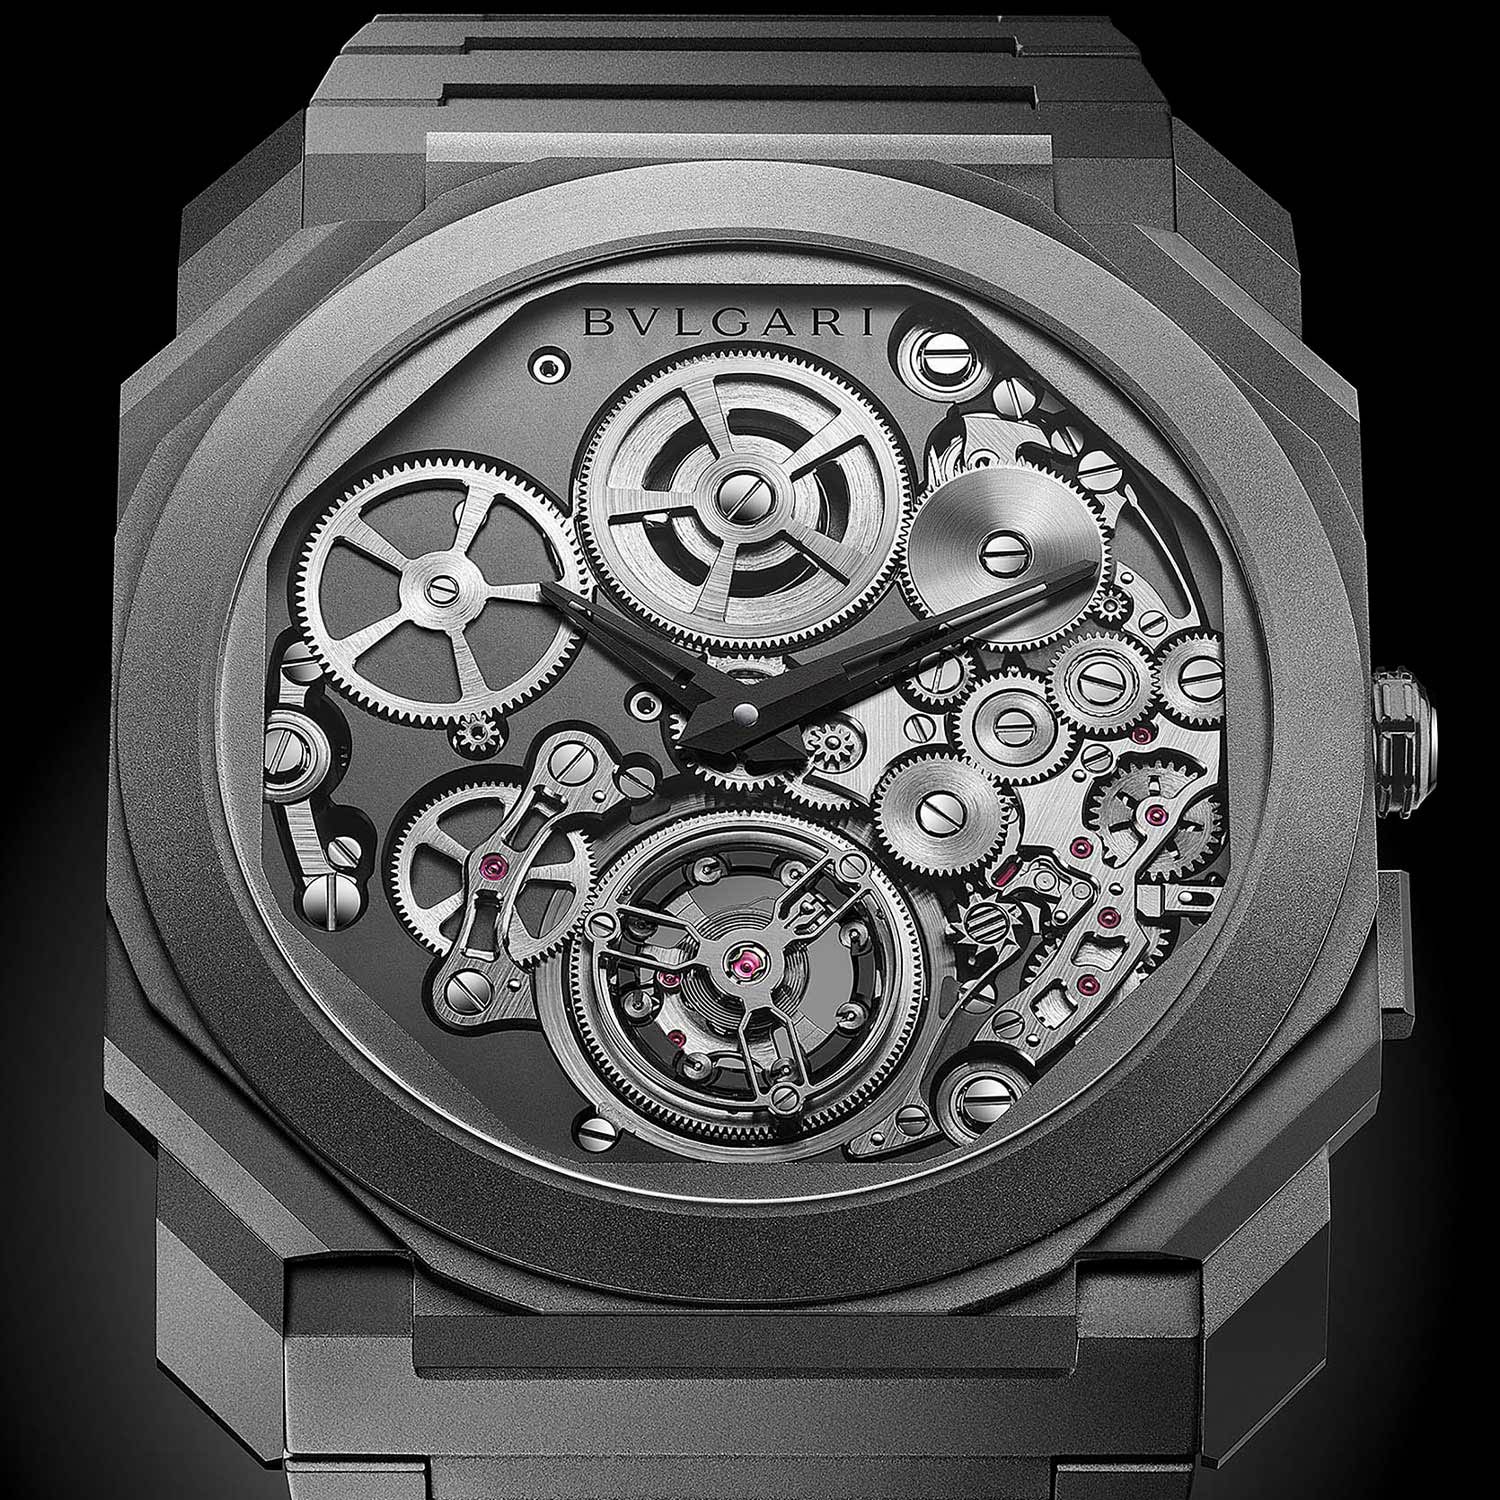 Bvlgari followed it up with the Octo Finissimo Tourbillon Automatic in 2018, which established the brand as an innovator in the high complication segment